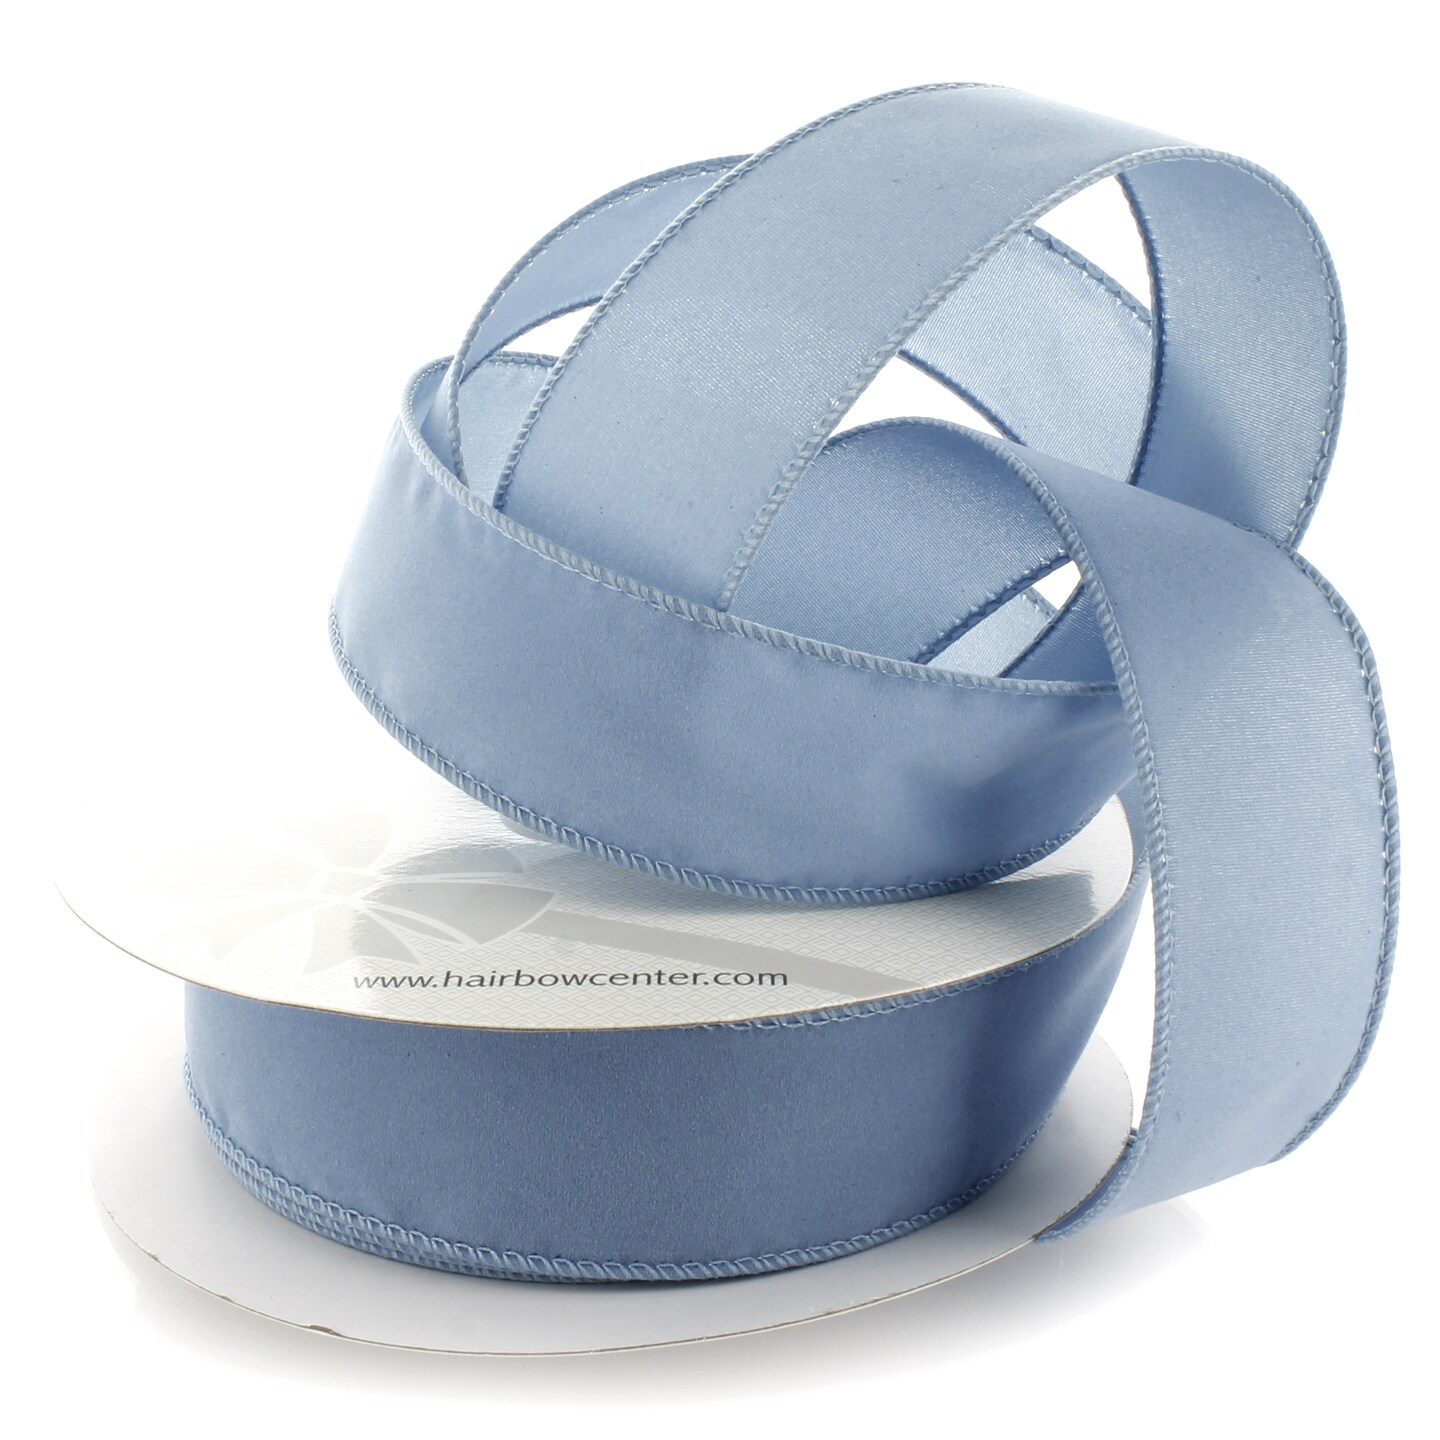 Wired Velvet Ribbon from American Ribbon Manufcaturers